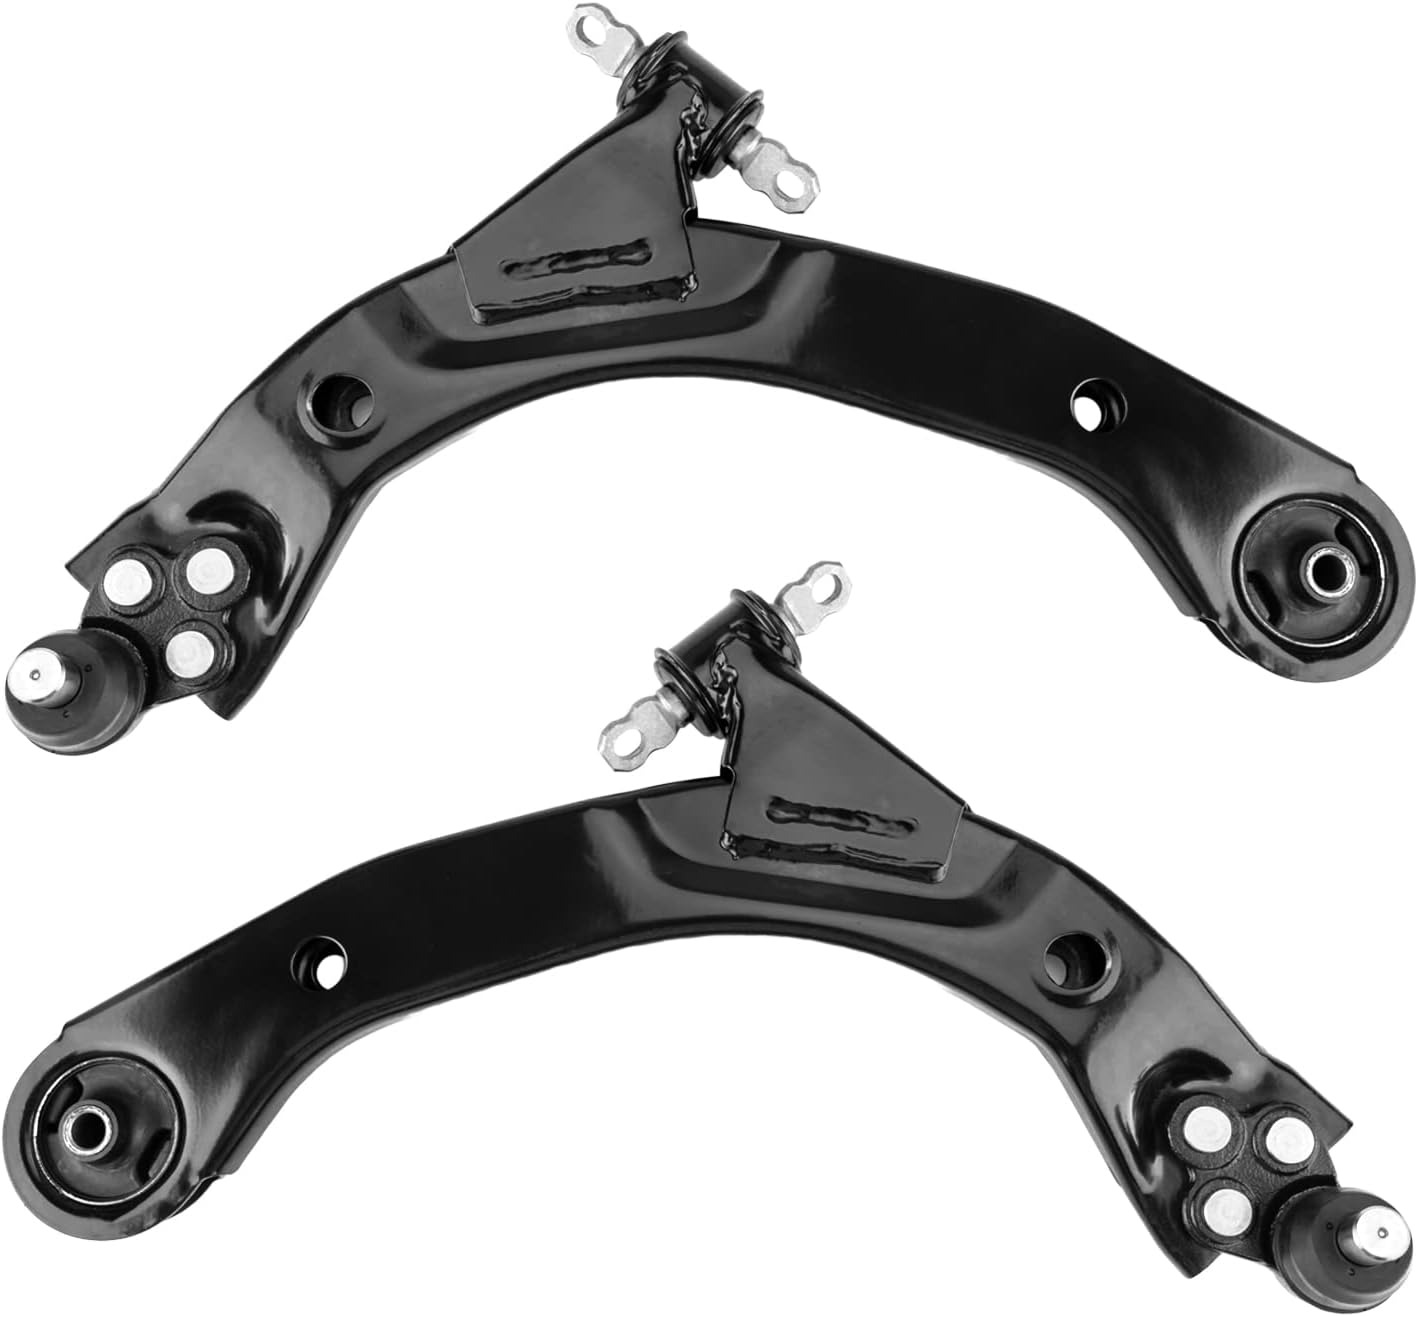 2PCS Front Left & Right Lower Suspension Control Arms for 2005-2010 Cobalt FE1，2